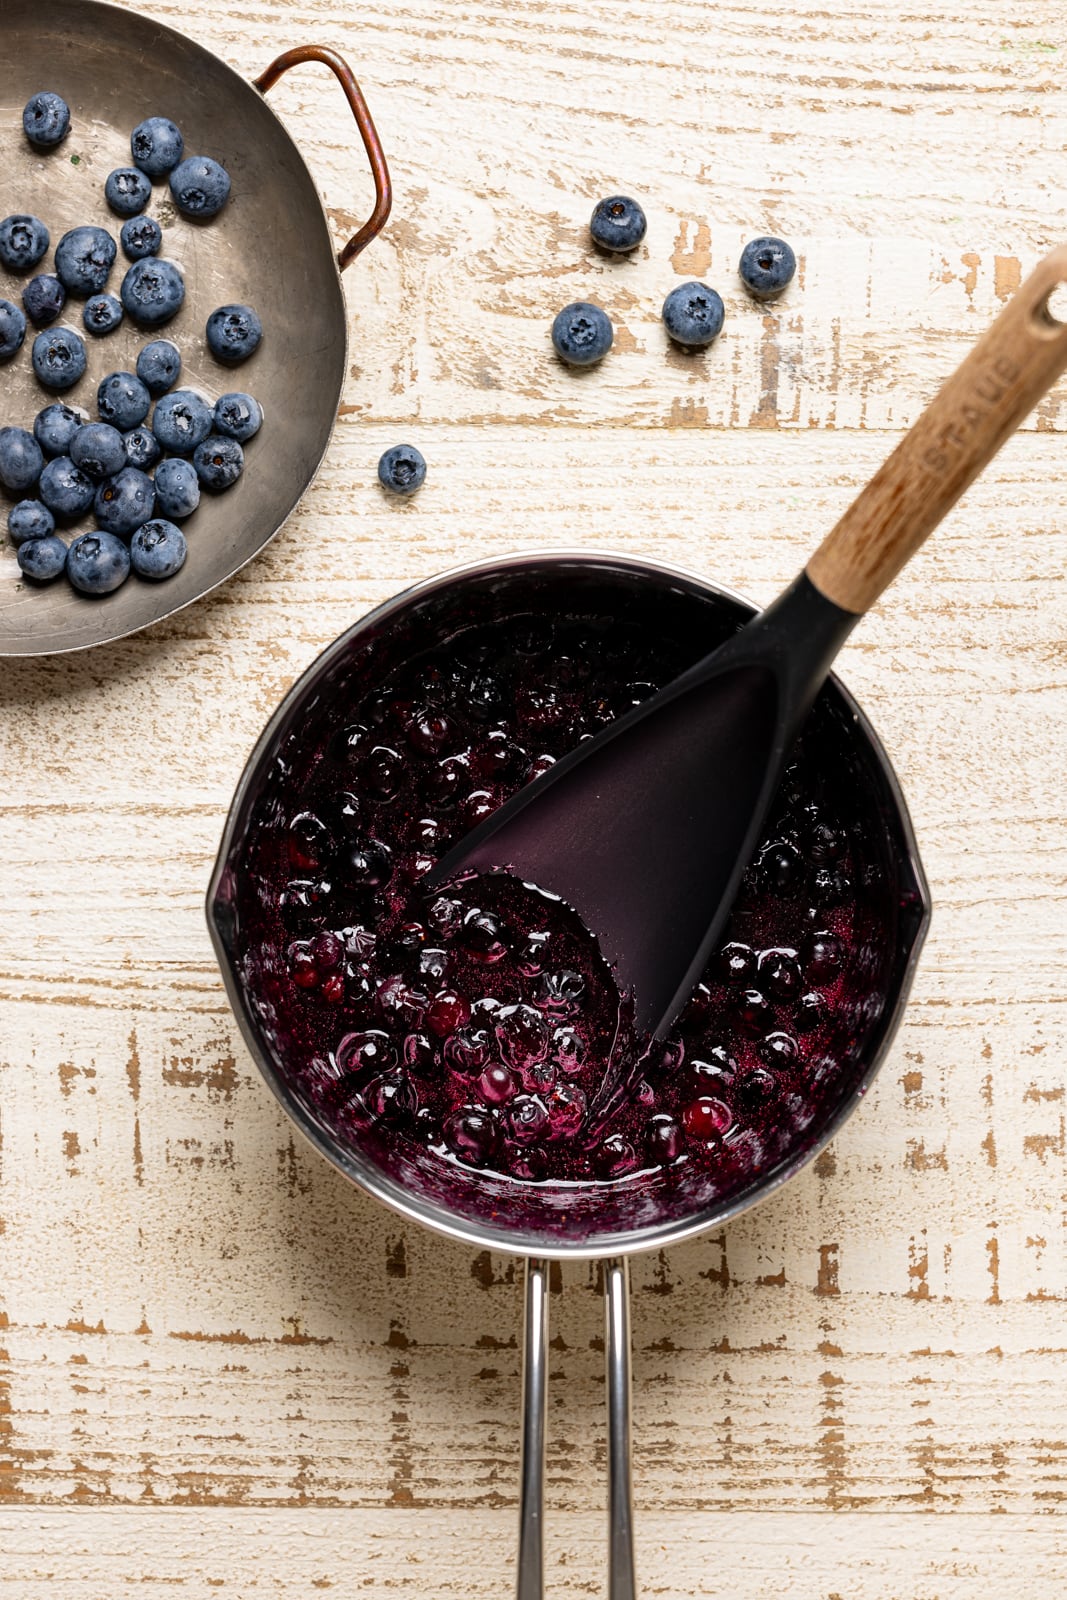 Blueberry compote in a saucepan with a spoon.